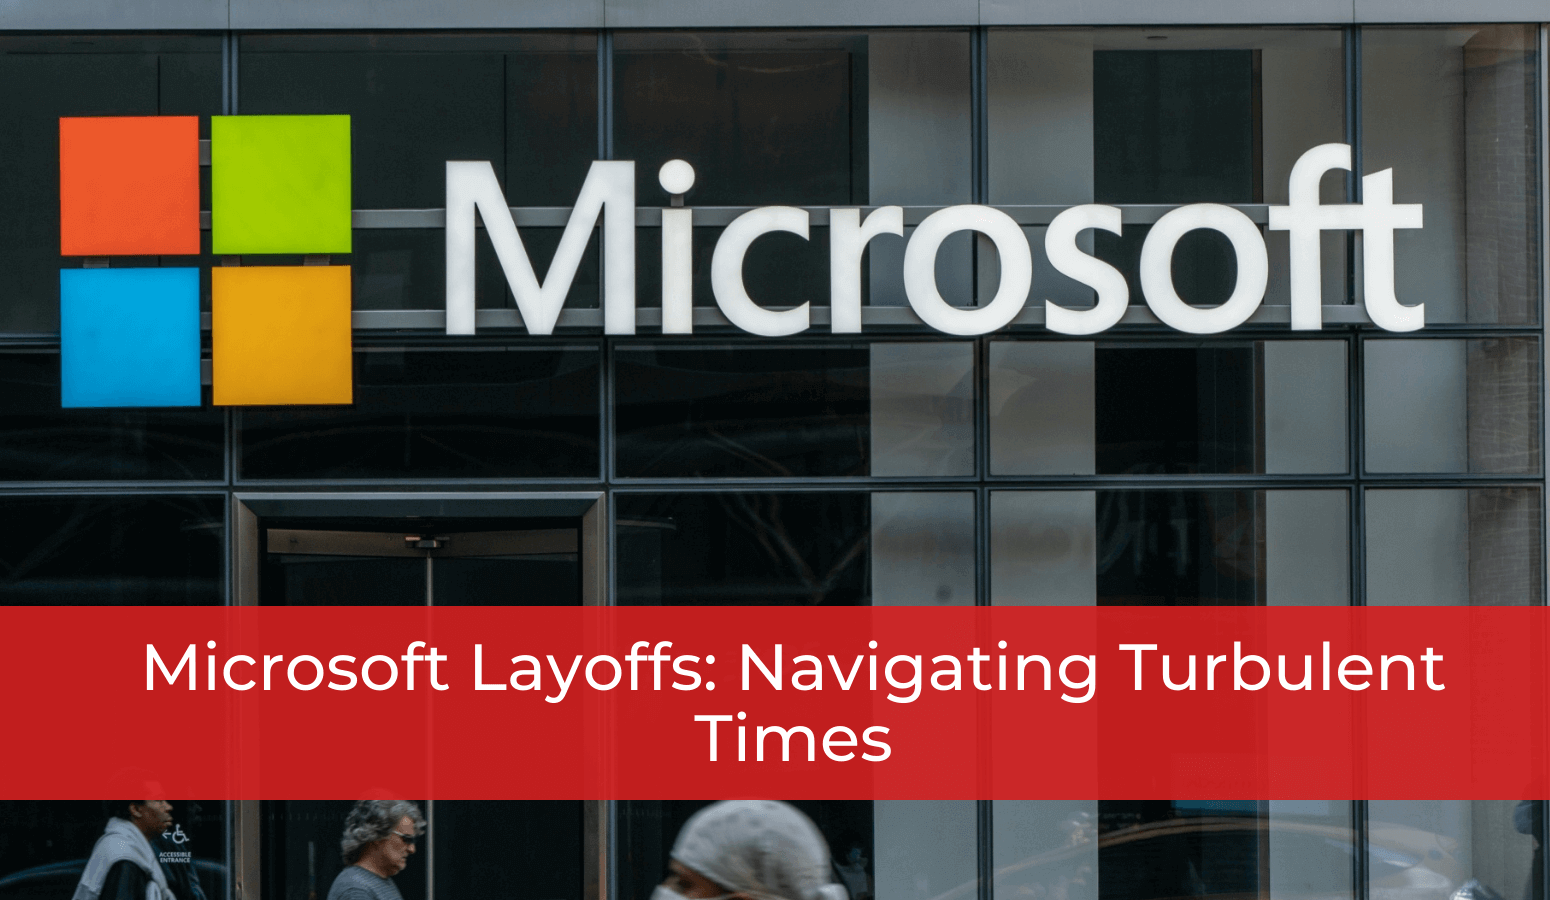 Featured image for “Microsoft Layoffs: Navigating Turbulent Times”